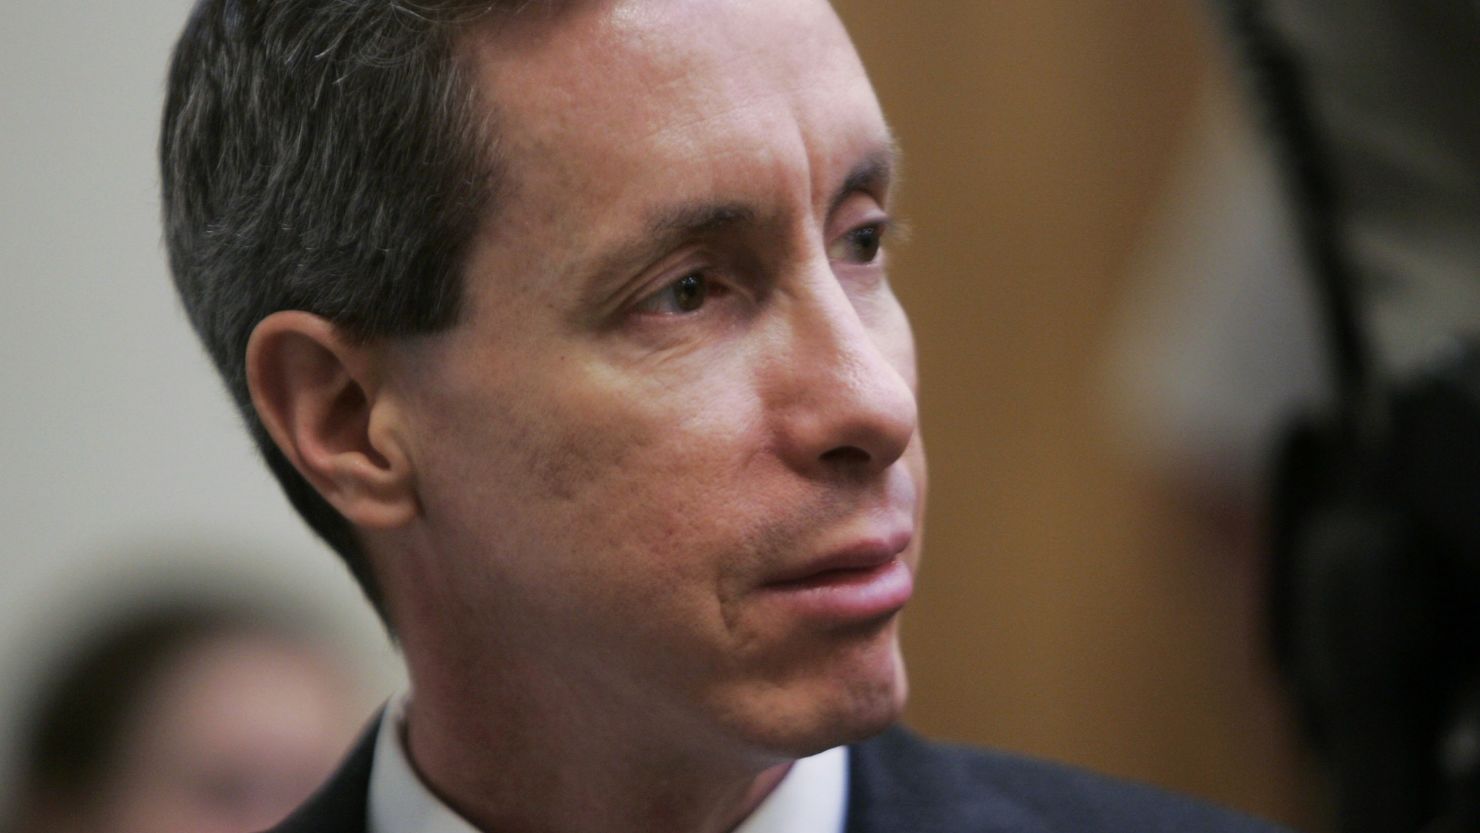 Warren Jeffs is serving a life-plus-20-year term in Texas for sexual assault.